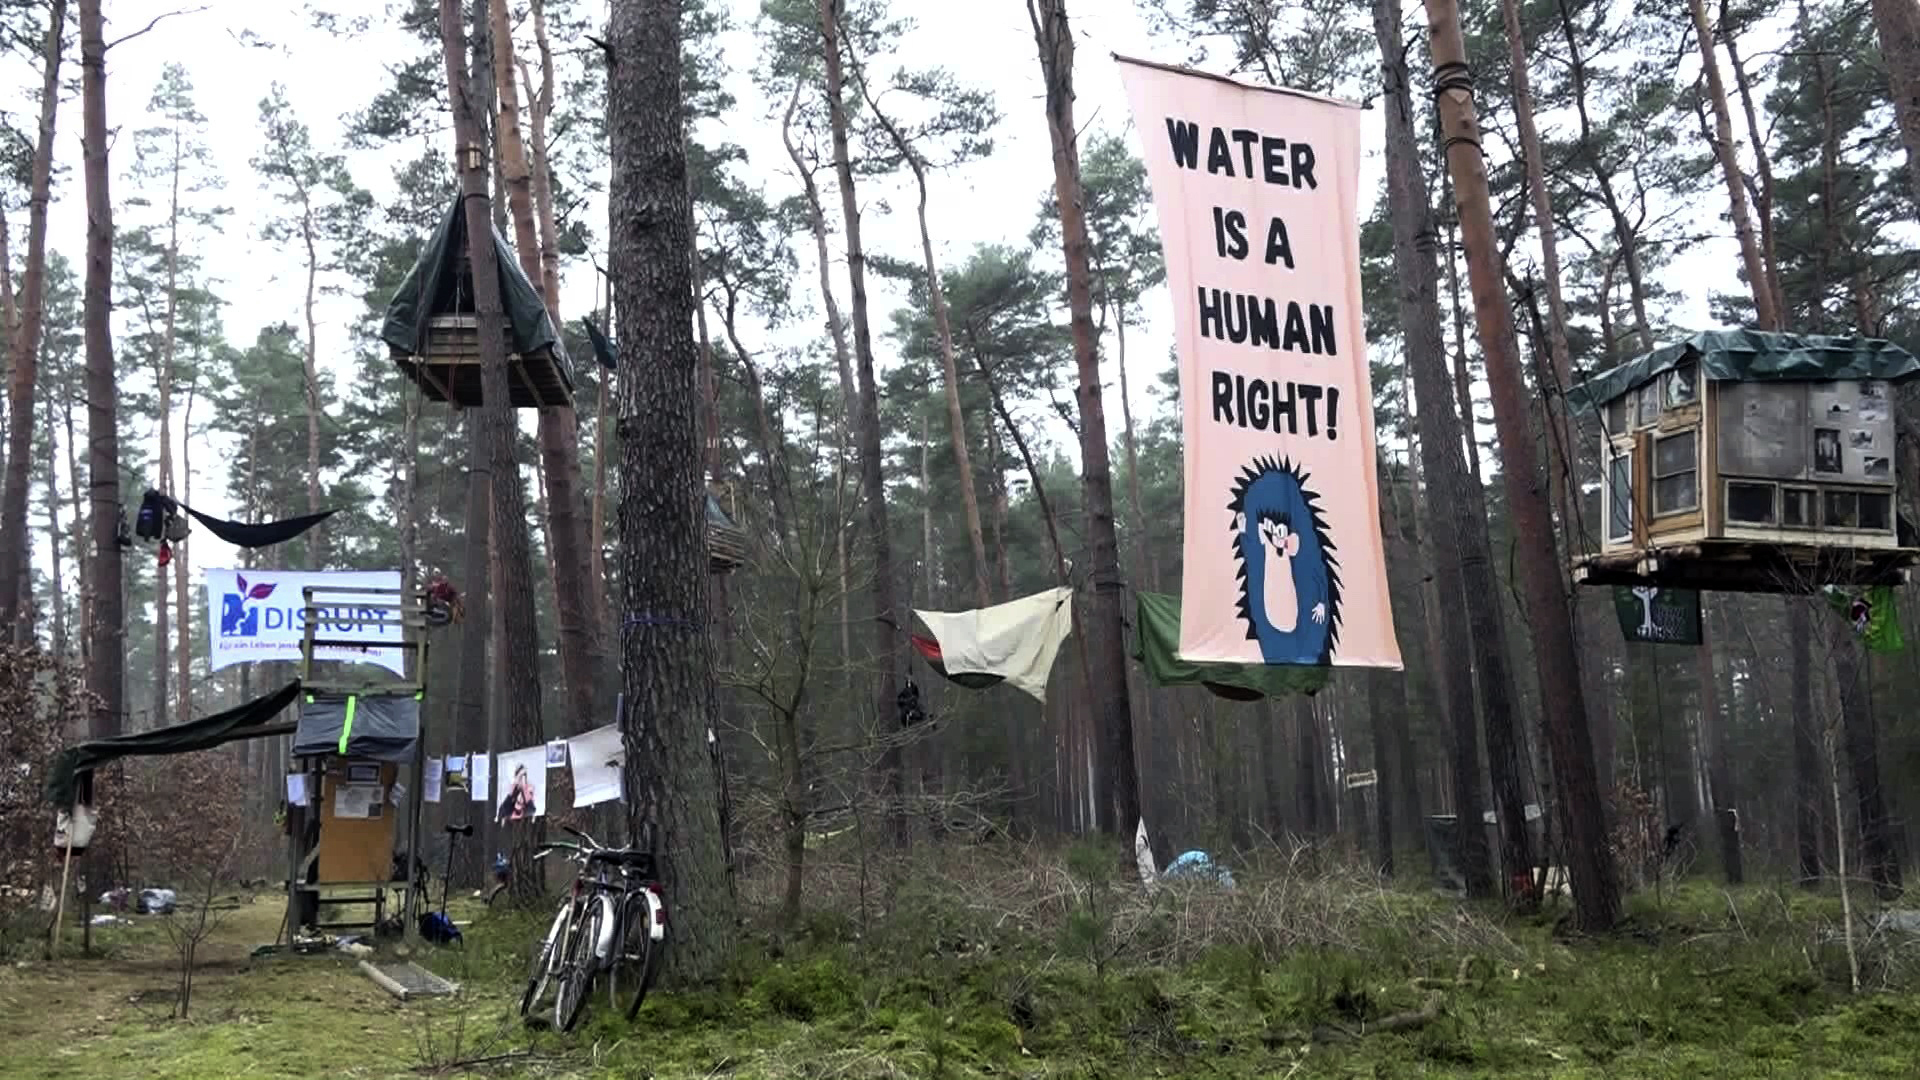 Activists Build Treehouses to Protest Tesla’s Plans to Expand Its Plant Near...